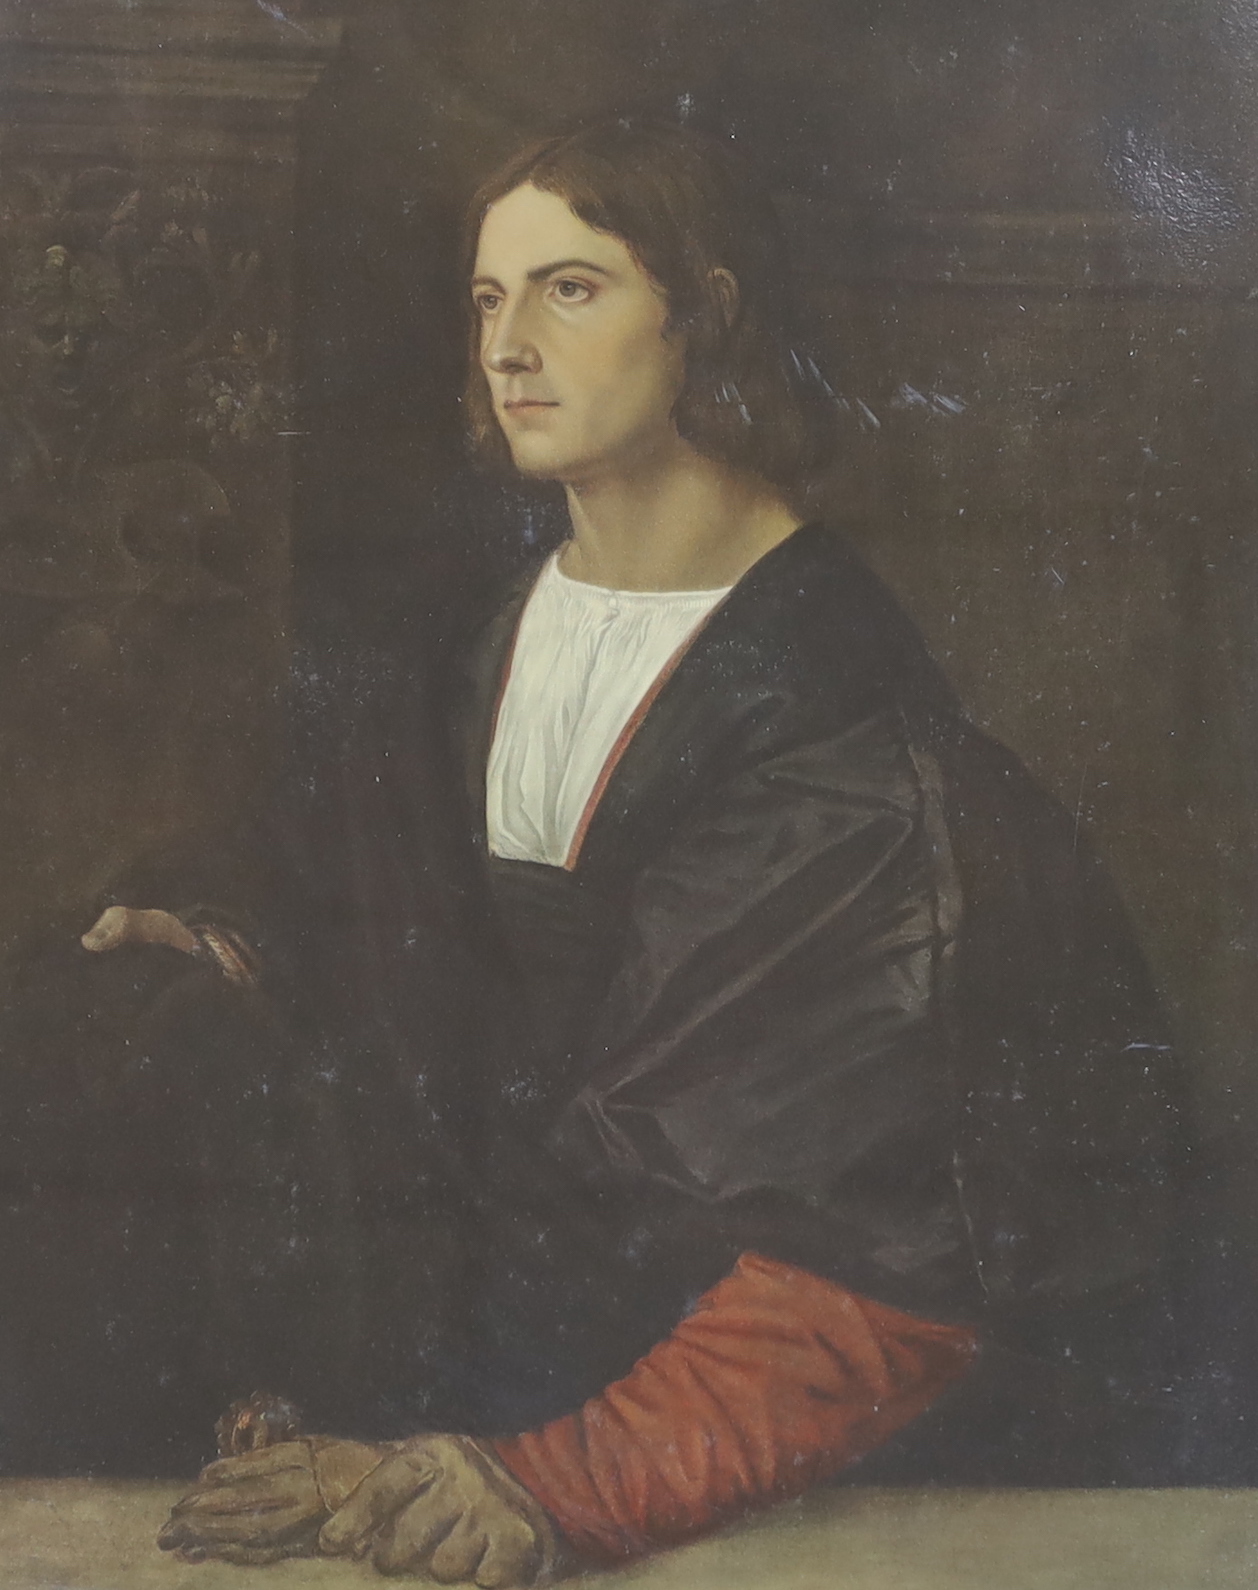 After Titian (Italian, d.1576), Medici Society colour print, Portrait of a young gentleman, label verso, housed in a painted wood frame gilded with fleur de lys, 60 x 50cm